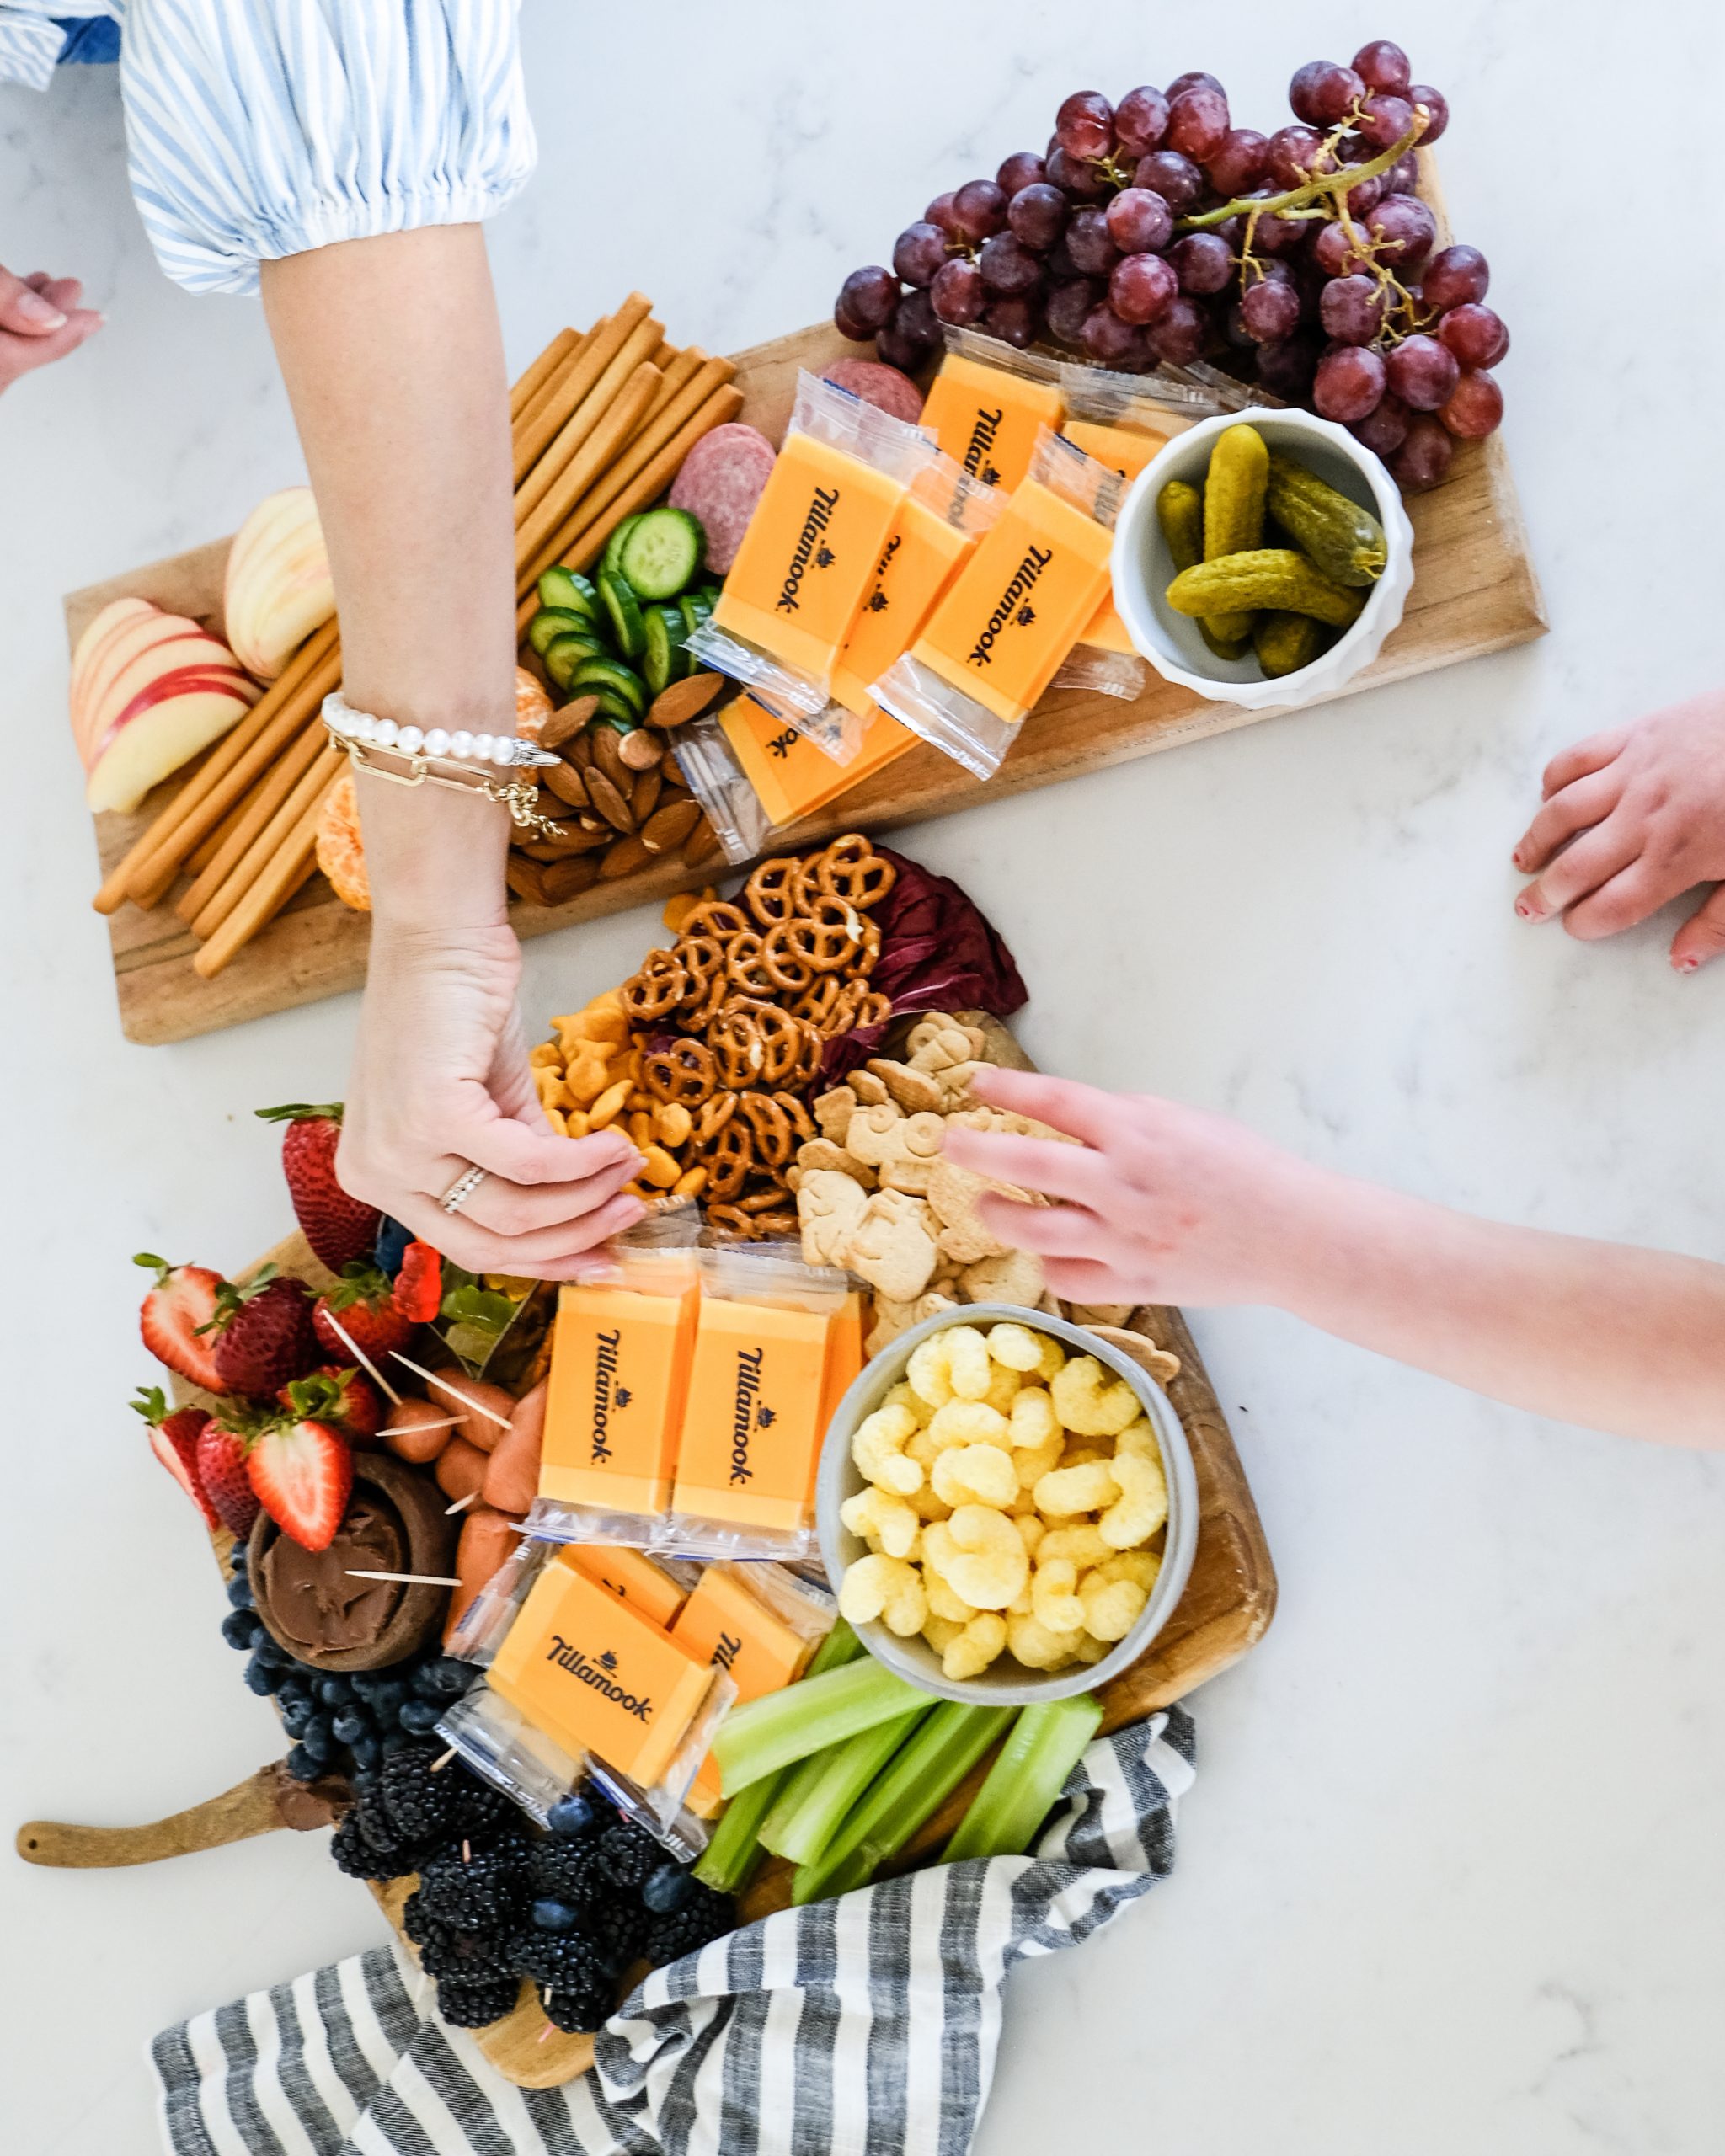 a snack board with popcorn, cheese, apples and snacks for kids with kids hands in the photo